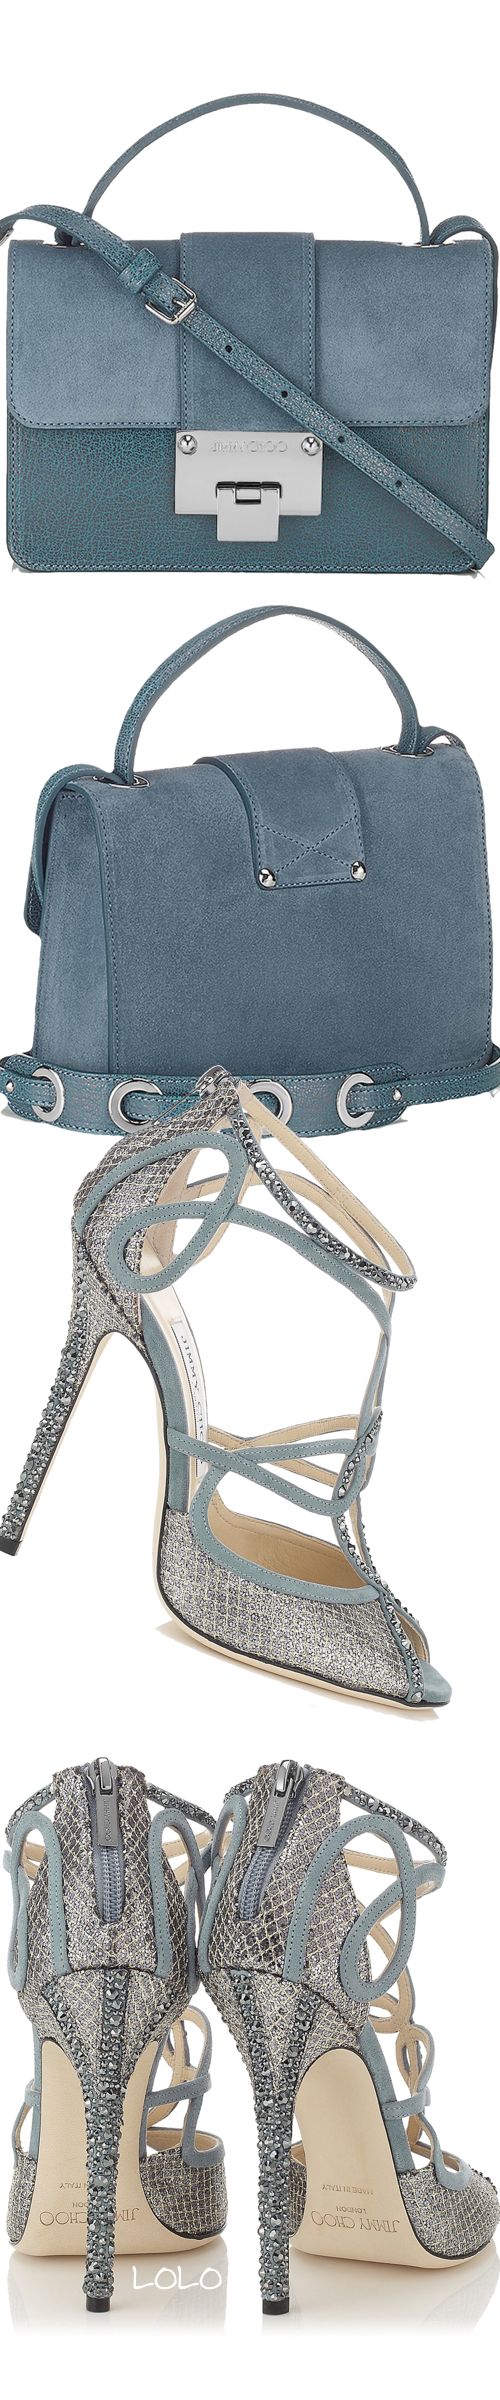 Jimmy Choo Ladies Handbags, Shoes and Accessories Collection 2015-2016 (24) - Copy